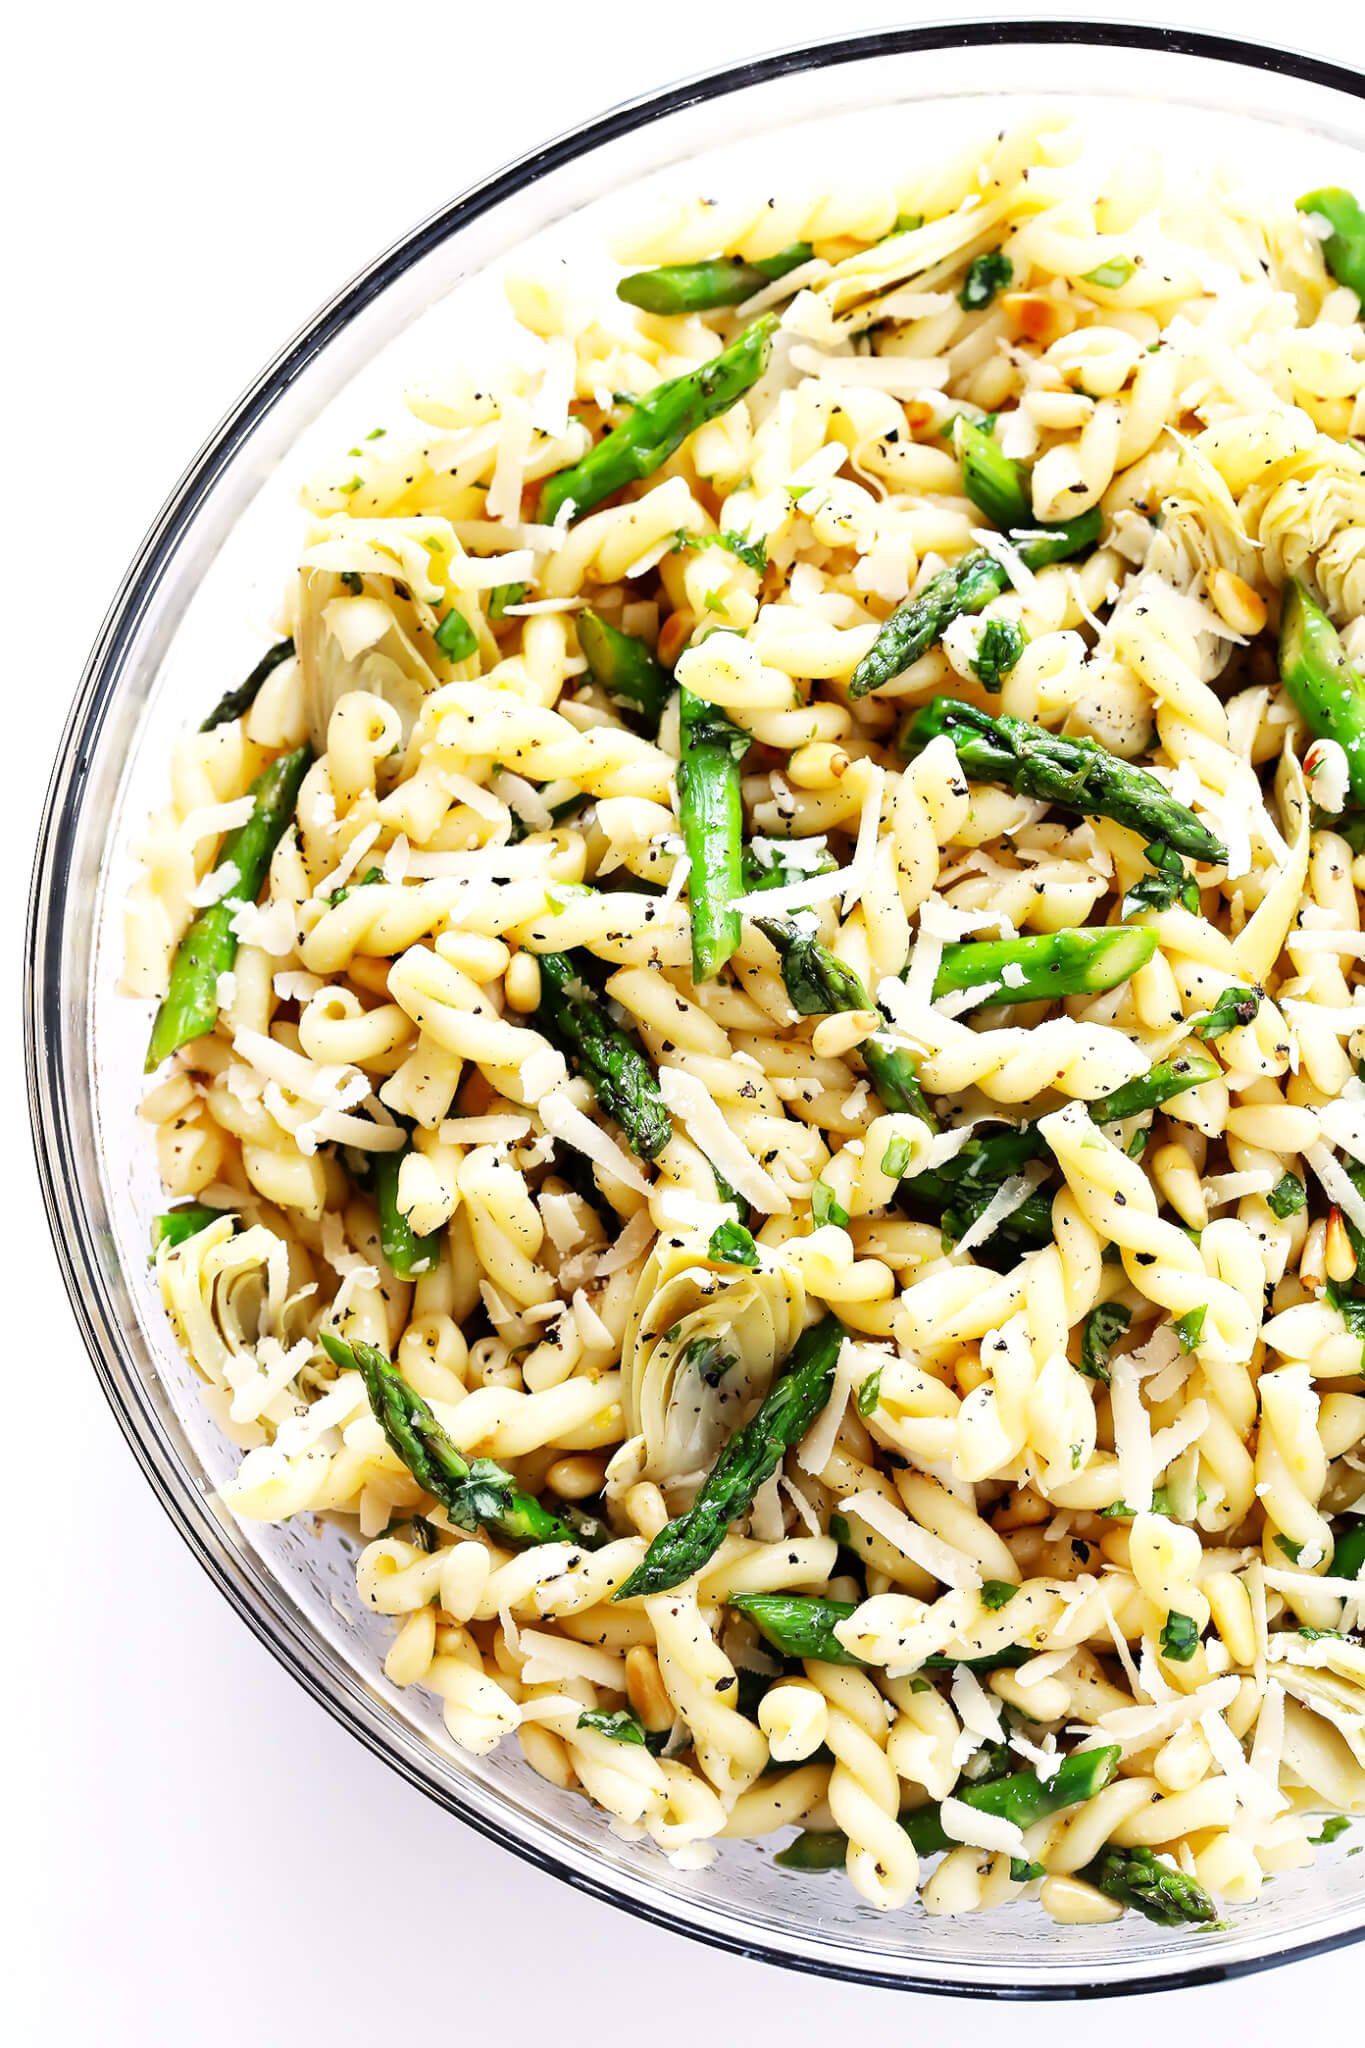 This Lemon Asparagus Easy Pasta Salad recipe is so fresh and delicious, and super quick and easy to make! | gimmesomeoven.com